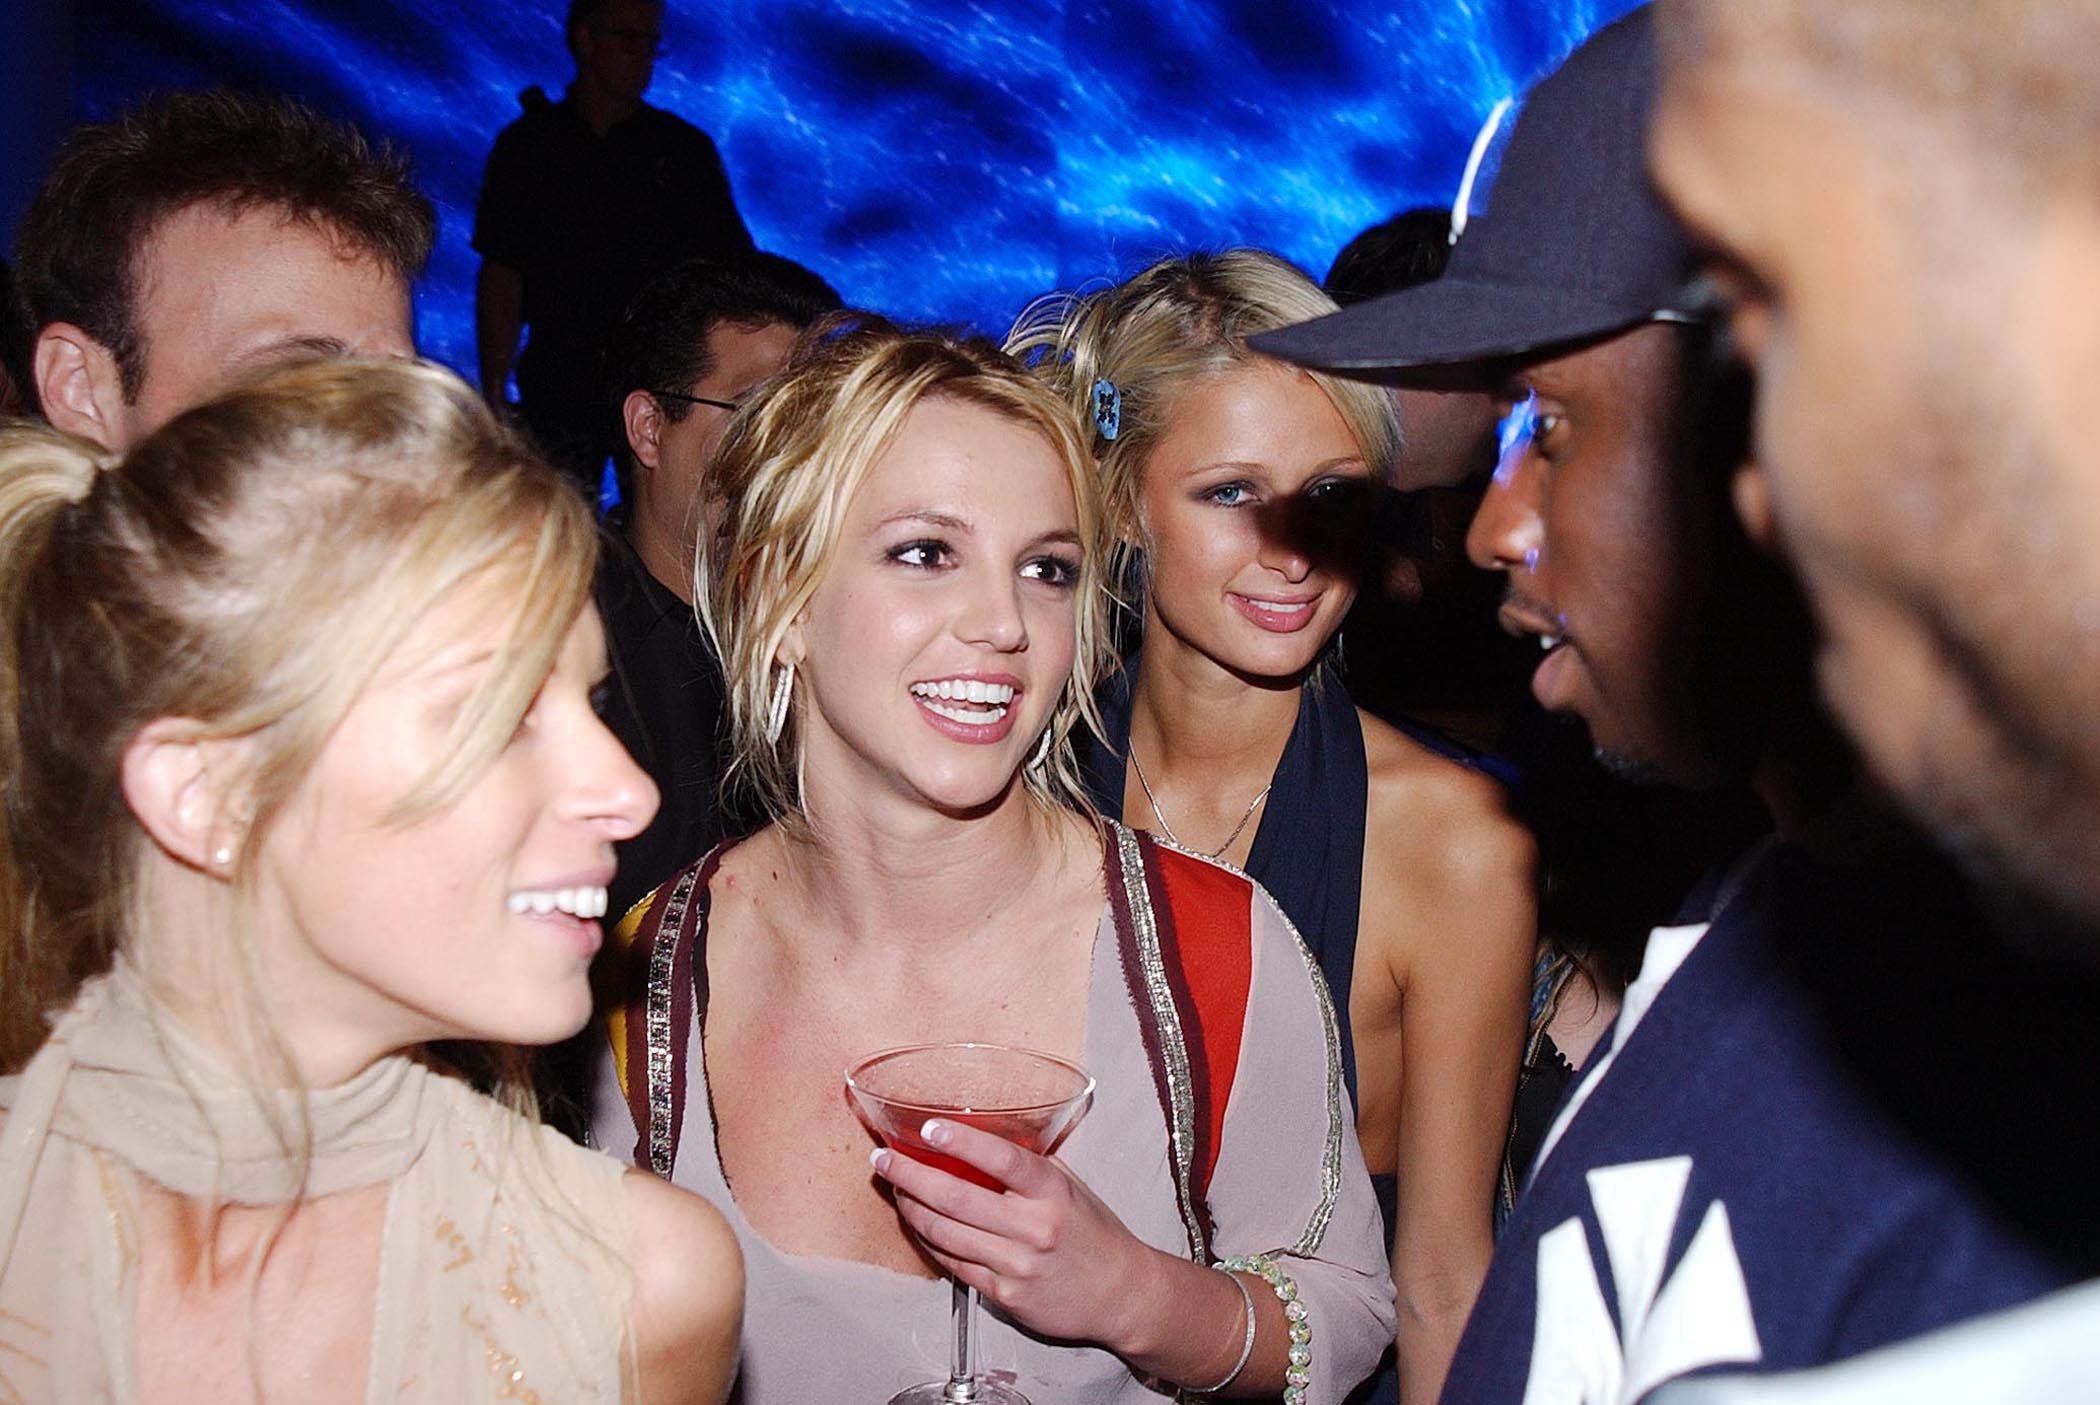 Britney Spears (centre) at a party in Los Angeles in October 2002 with Paris Hilton and Sean “P Diddy” Combs and other guests. The singer’s new book, “The Woman in Me” talks about everything from dating Justin Timberlake to her abortion and conservatorship. Photo: Getty Images